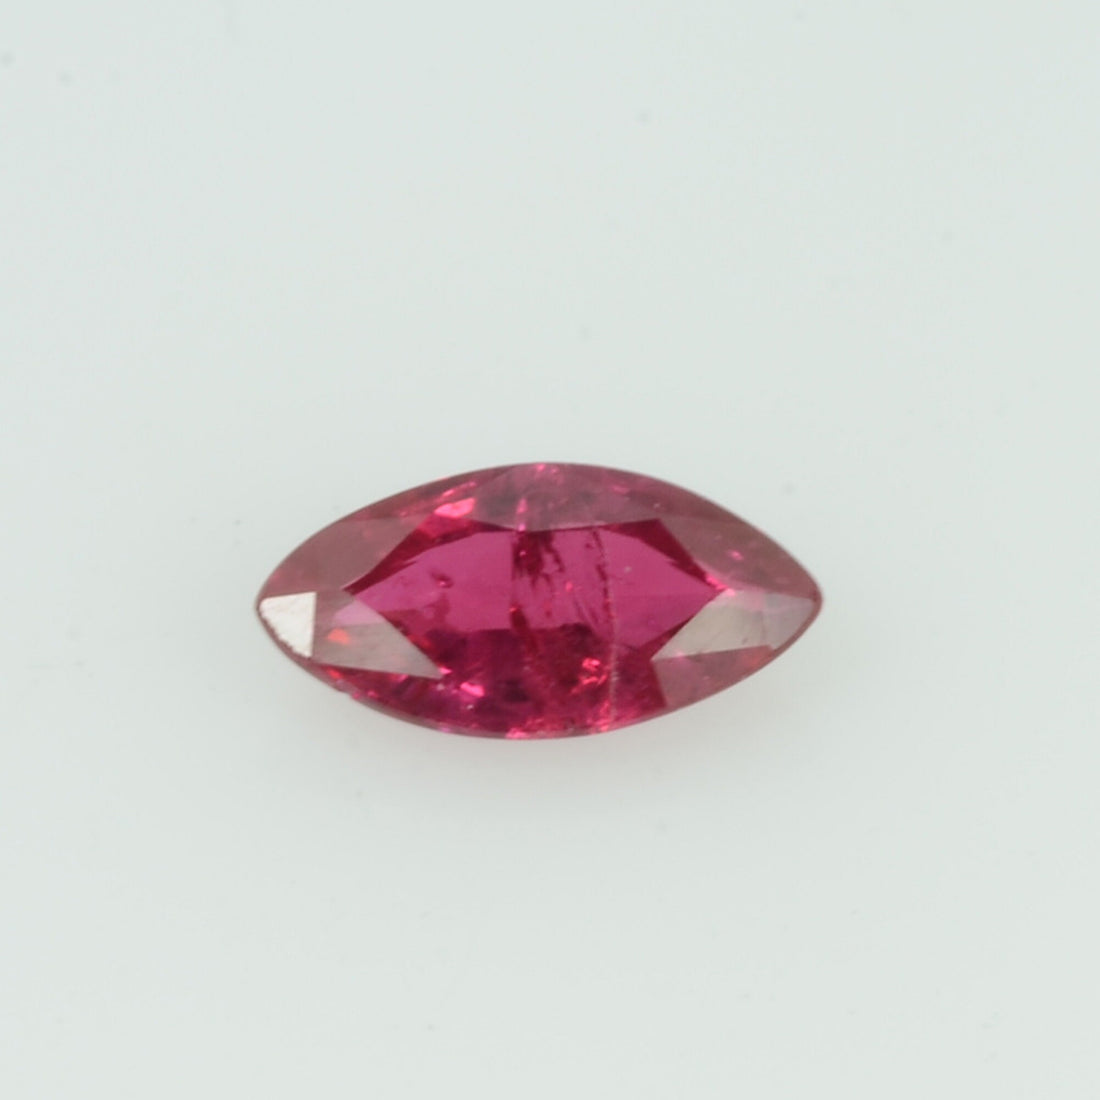 0.30 cts Natural Vietnam Ruby Loose Gemstone Marquise Cut